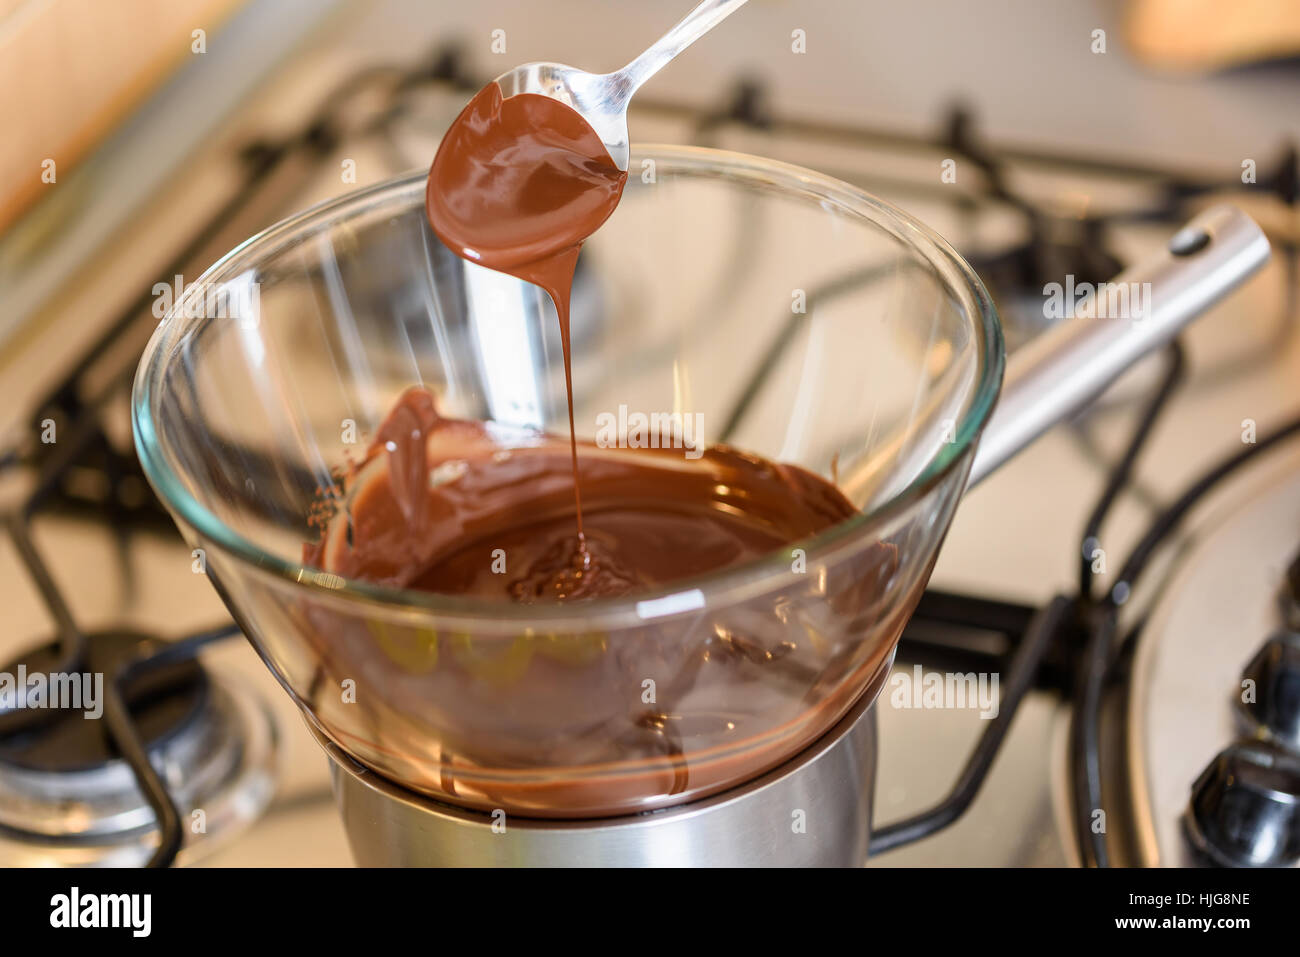 How to Melt Chocolate – Cookin' with Mima